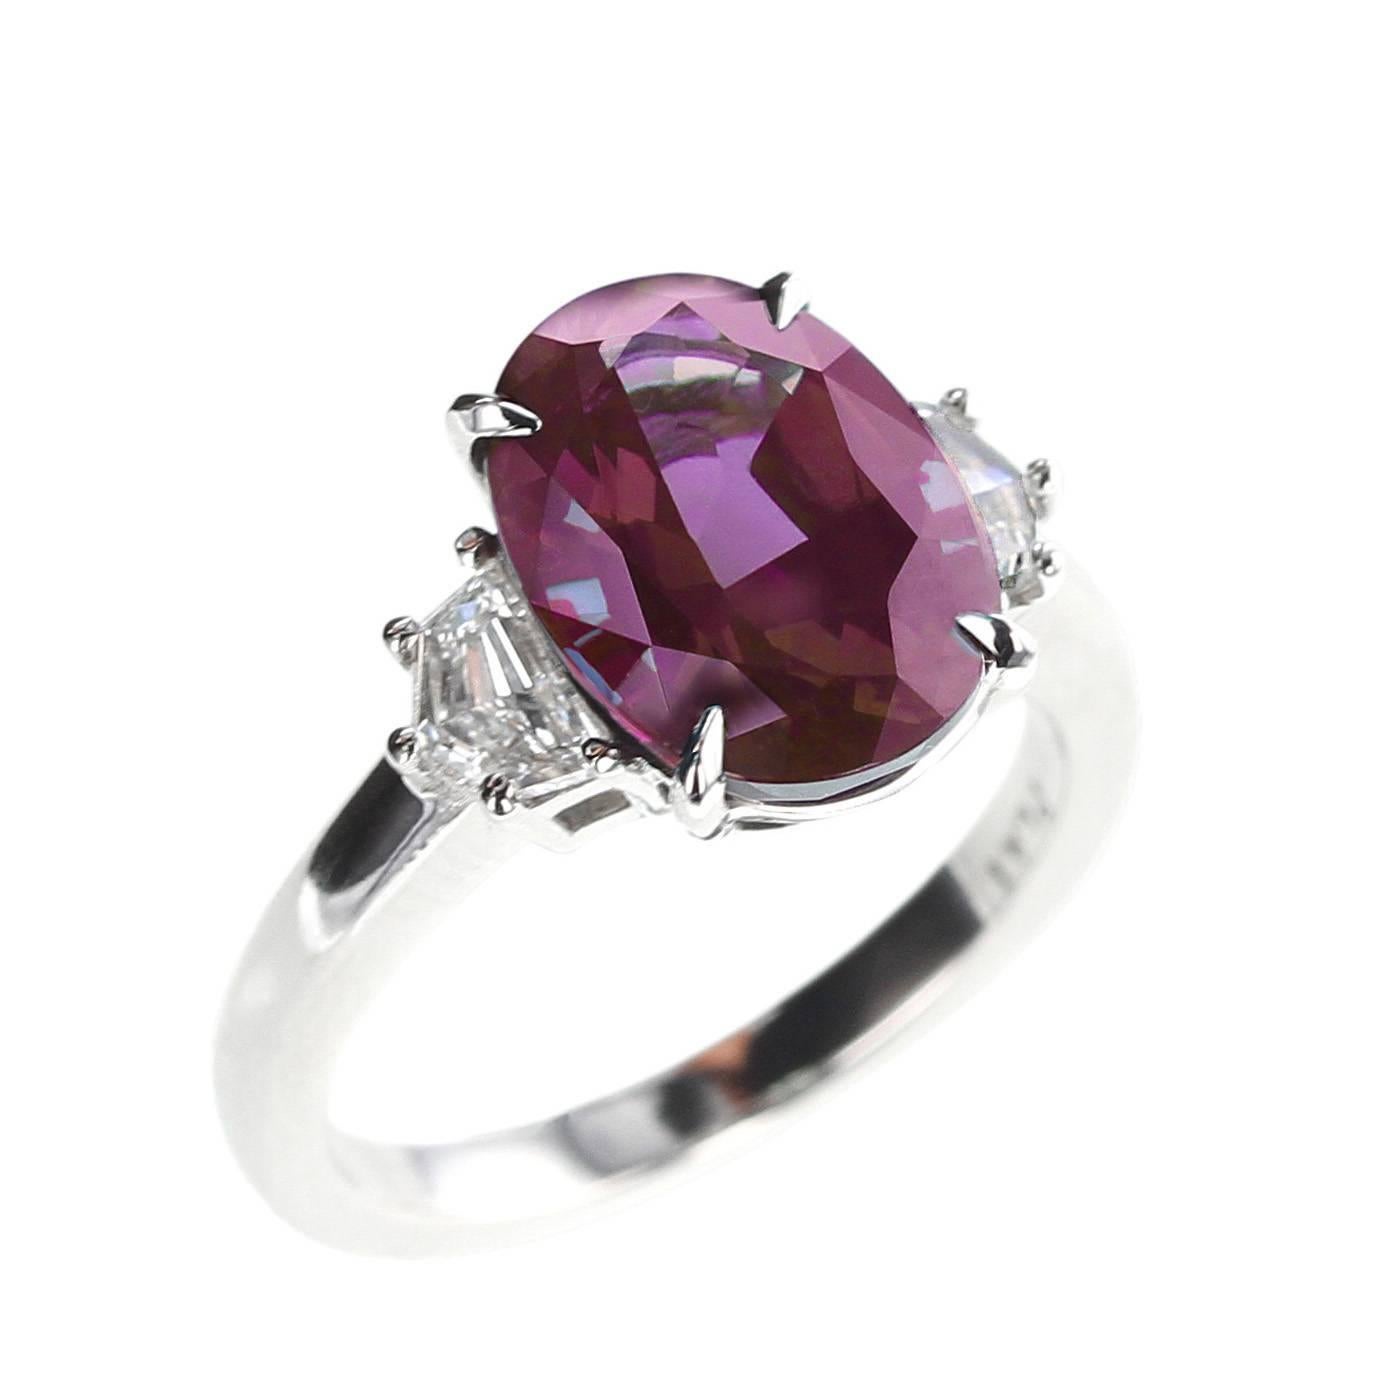 A classic three stone ring centered with a beautiful and natural, oval mixed-cut Alexandrite weighing over 5 carats accented with two shield-shape diamonds with a color clarity of F - VS and weighing 0.52 carats. The alexandrite accompanies a